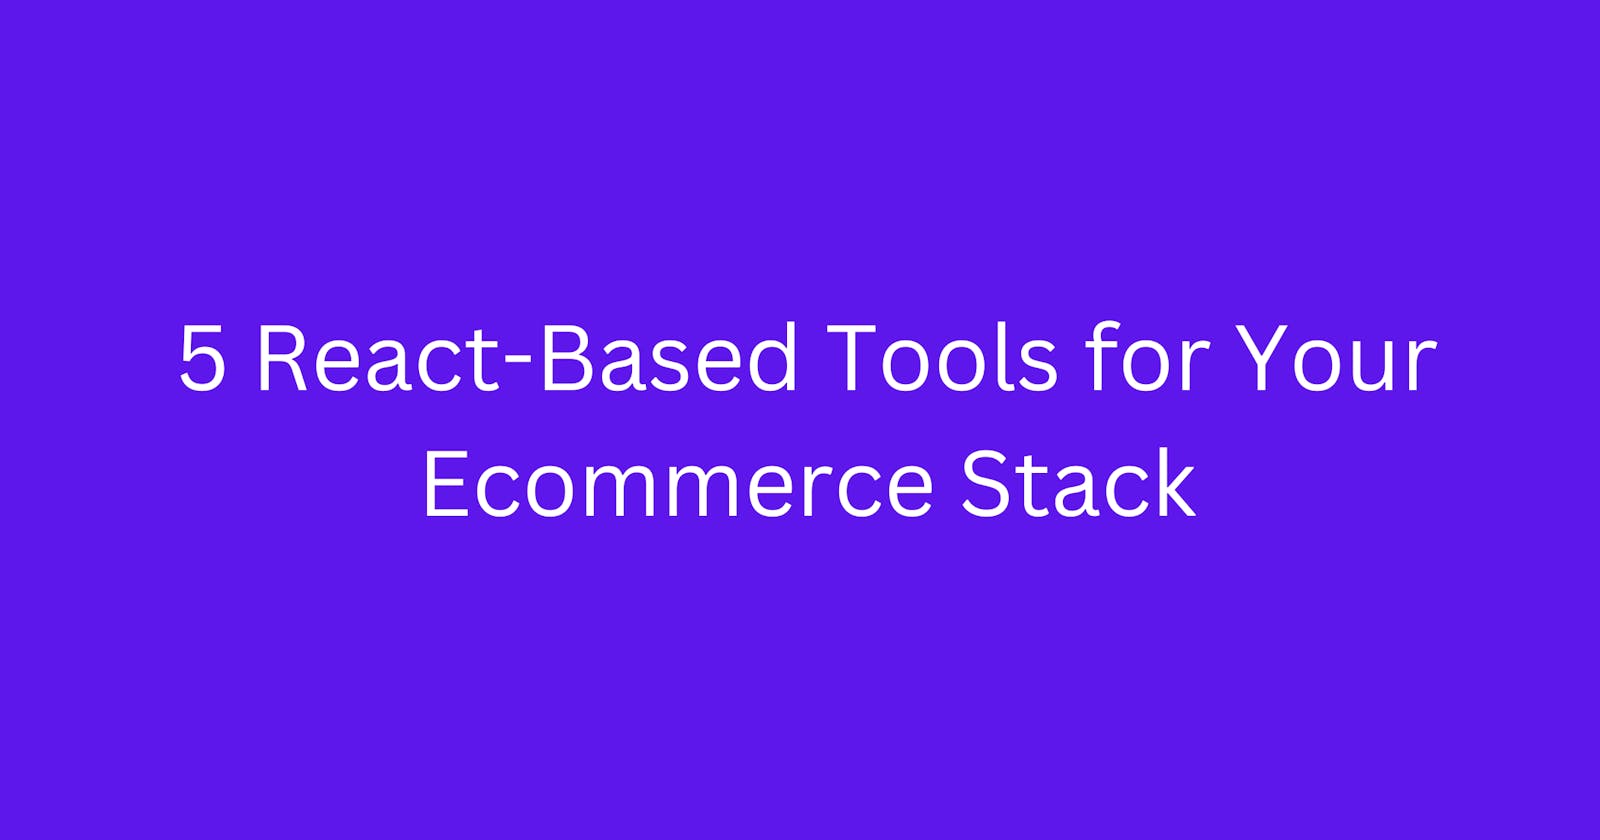 5 React-Based Tools for Your Ecommerce Stack